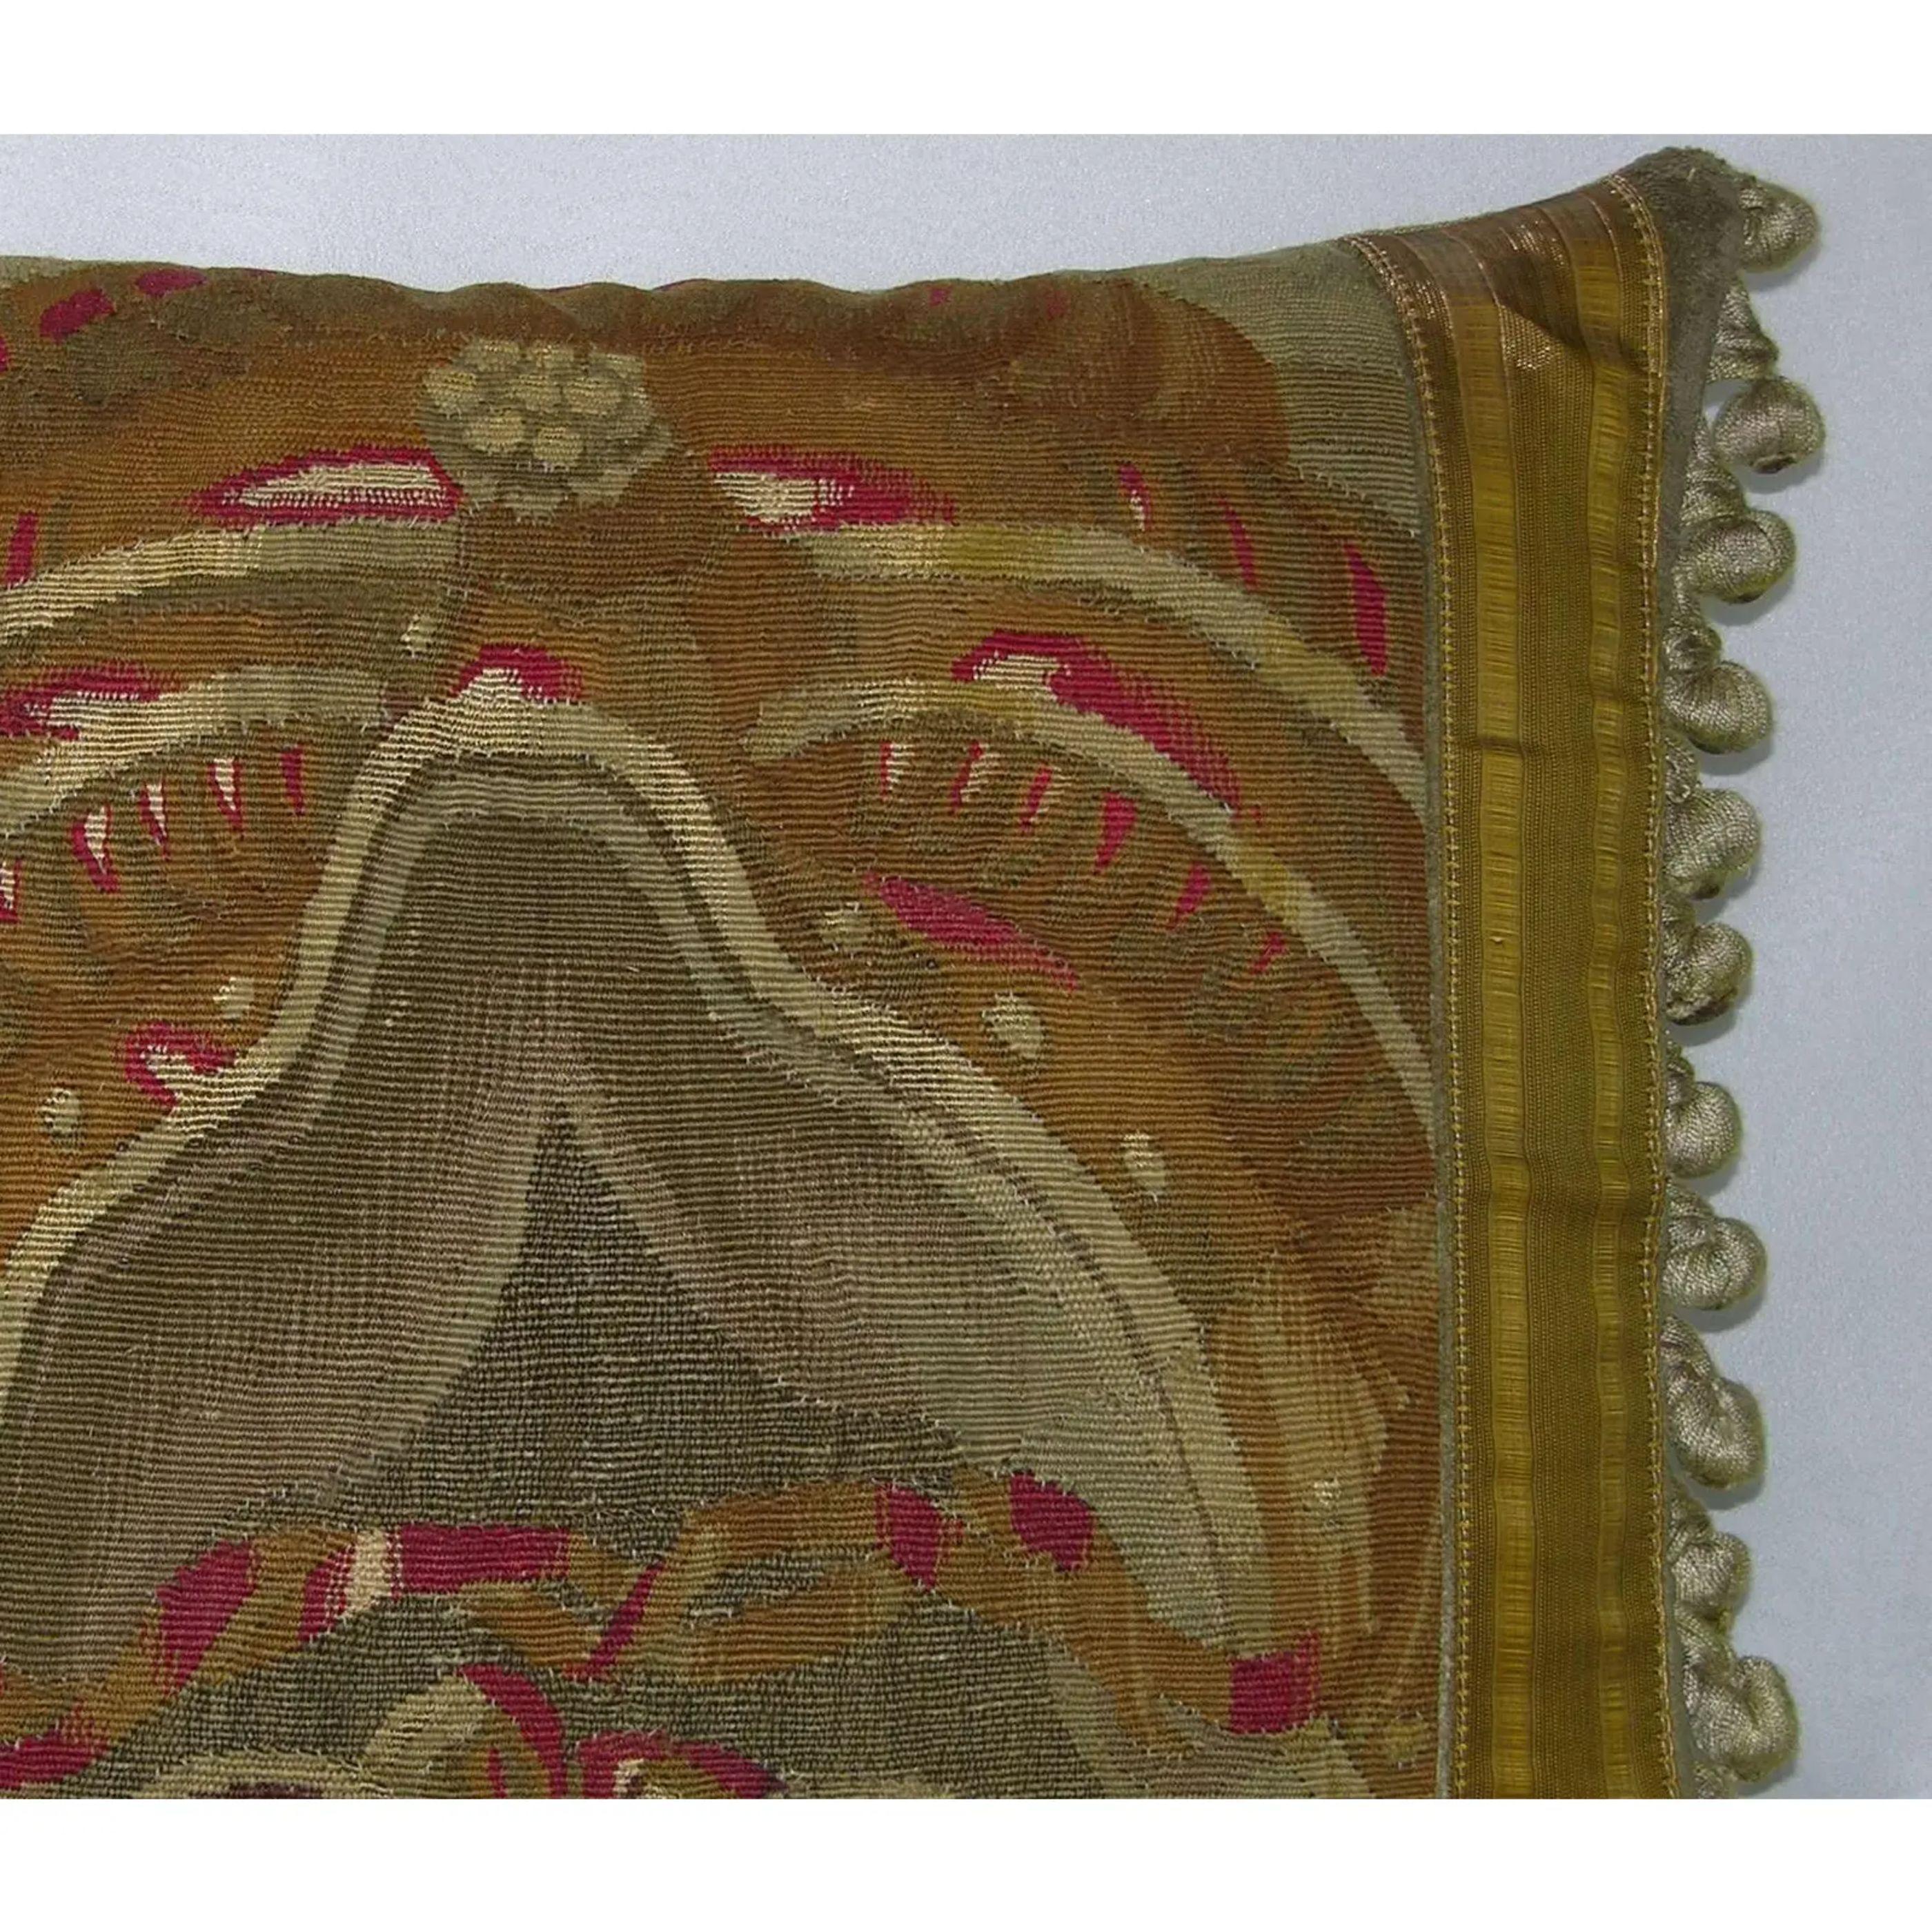 17th Century Antique Brussels Tapestry Pillow 18 X 17, handmade and needlepoint, wool pillow, traditional and empire design.